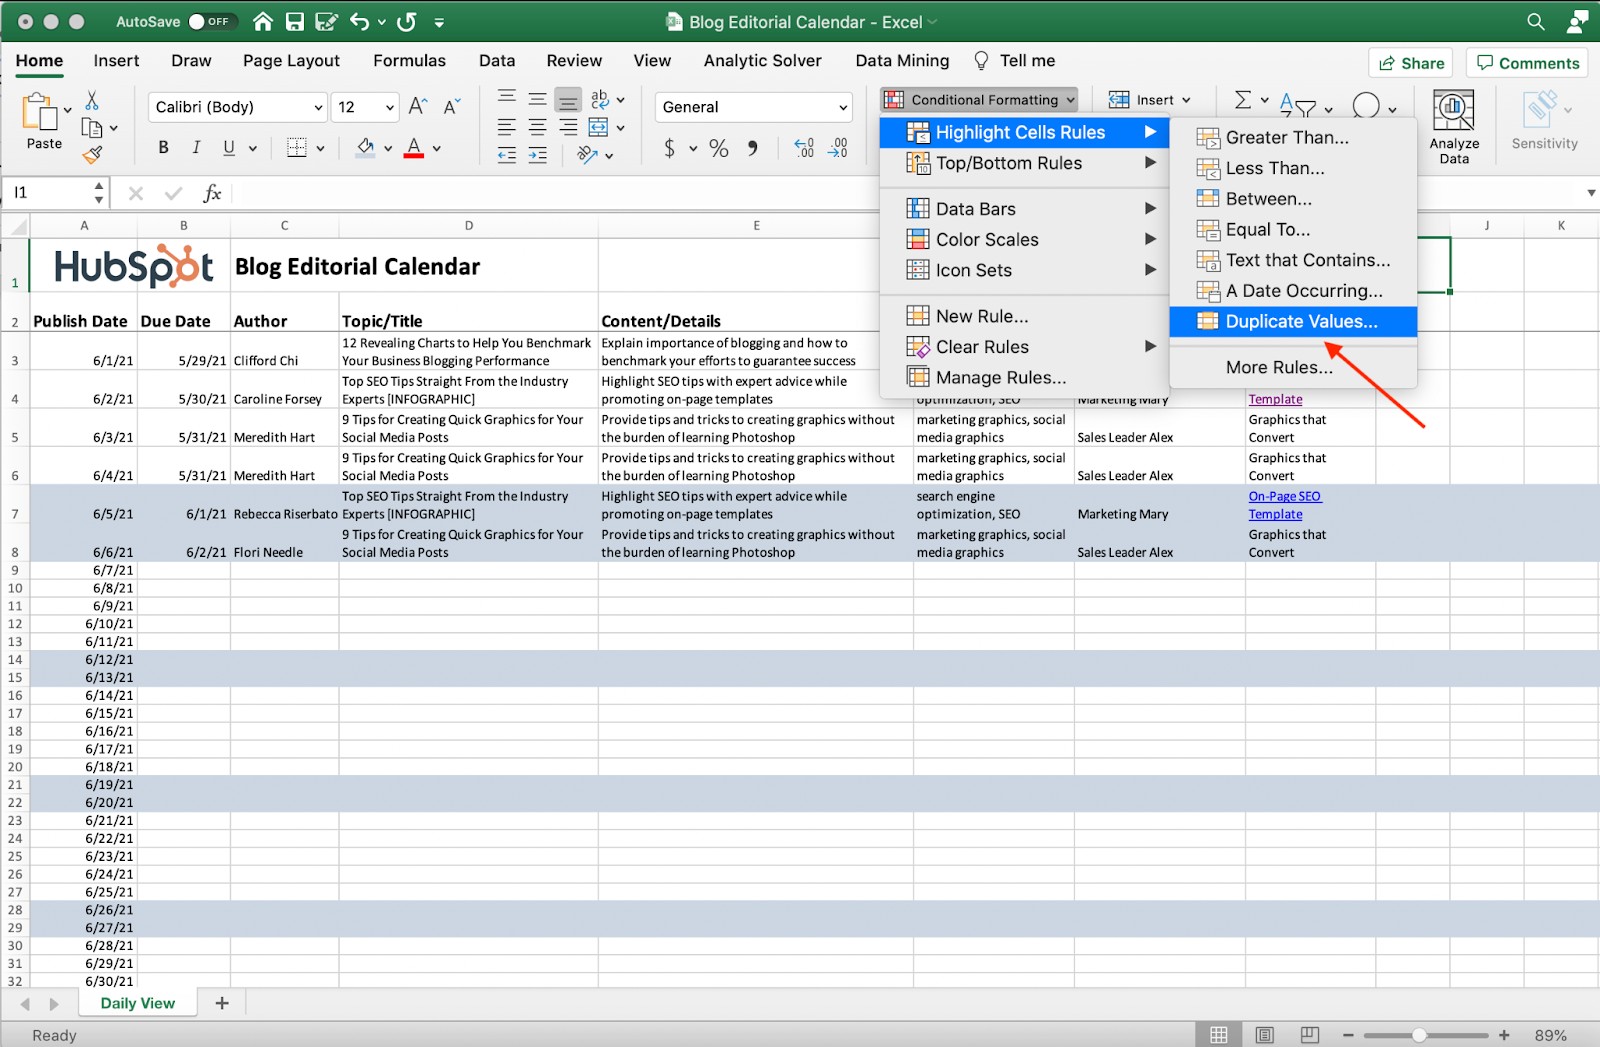 Screenshot of removing duplicate values in Excel.